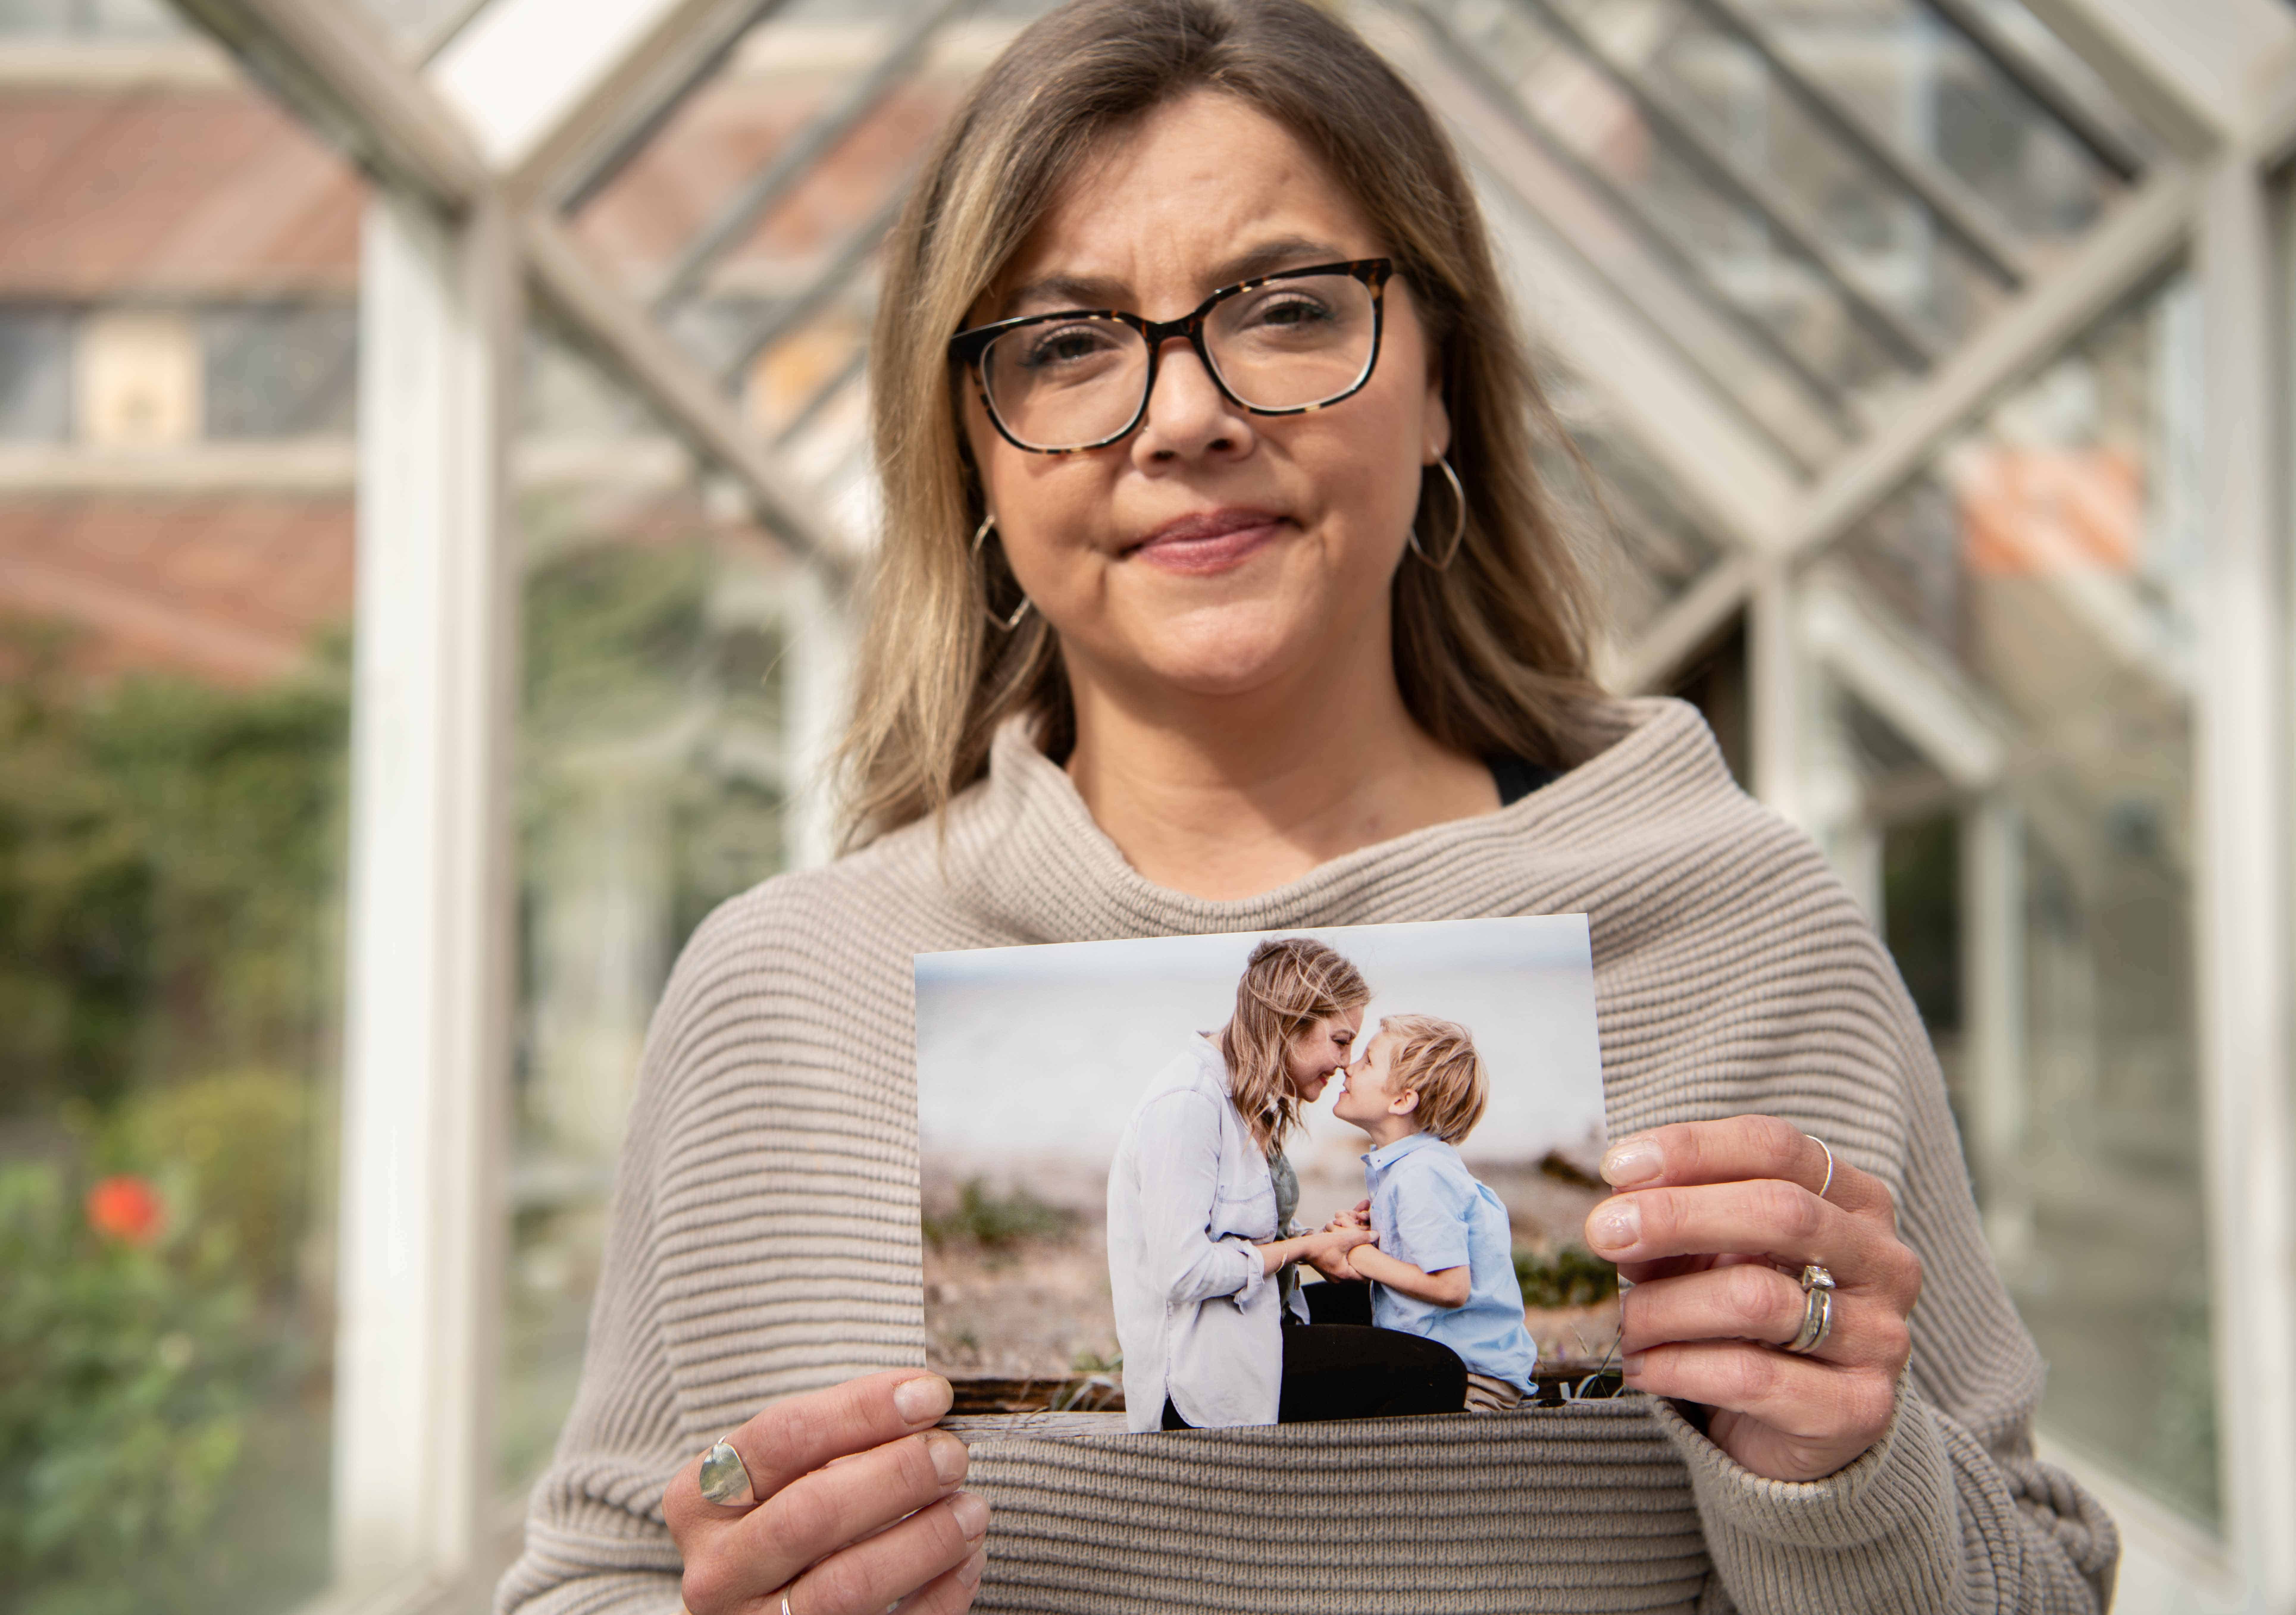 Kim Wood, grateful patient from Trikafta drug trial, holding an image of her and her son.